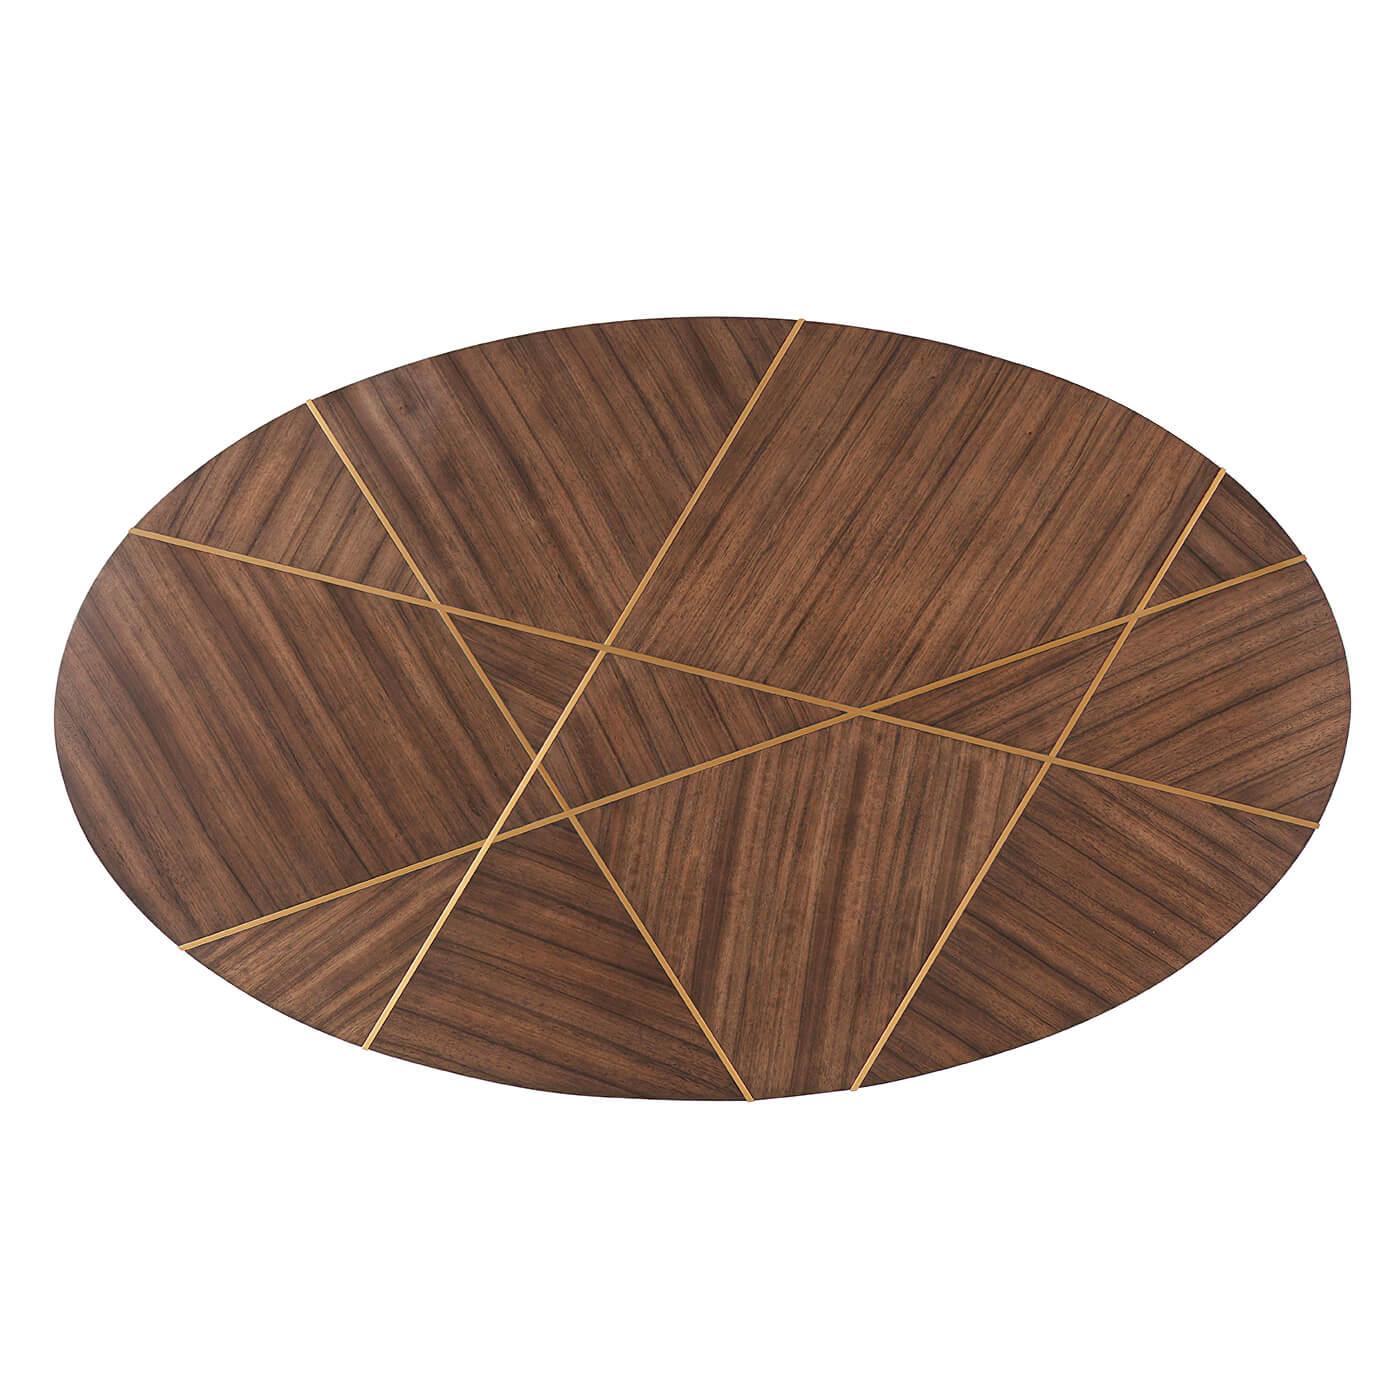 Modern coffee table with an angled edge oval slab top, with intersecting brass inlaid relief lines on an angled brass finish steel base.

Dimensions: 56